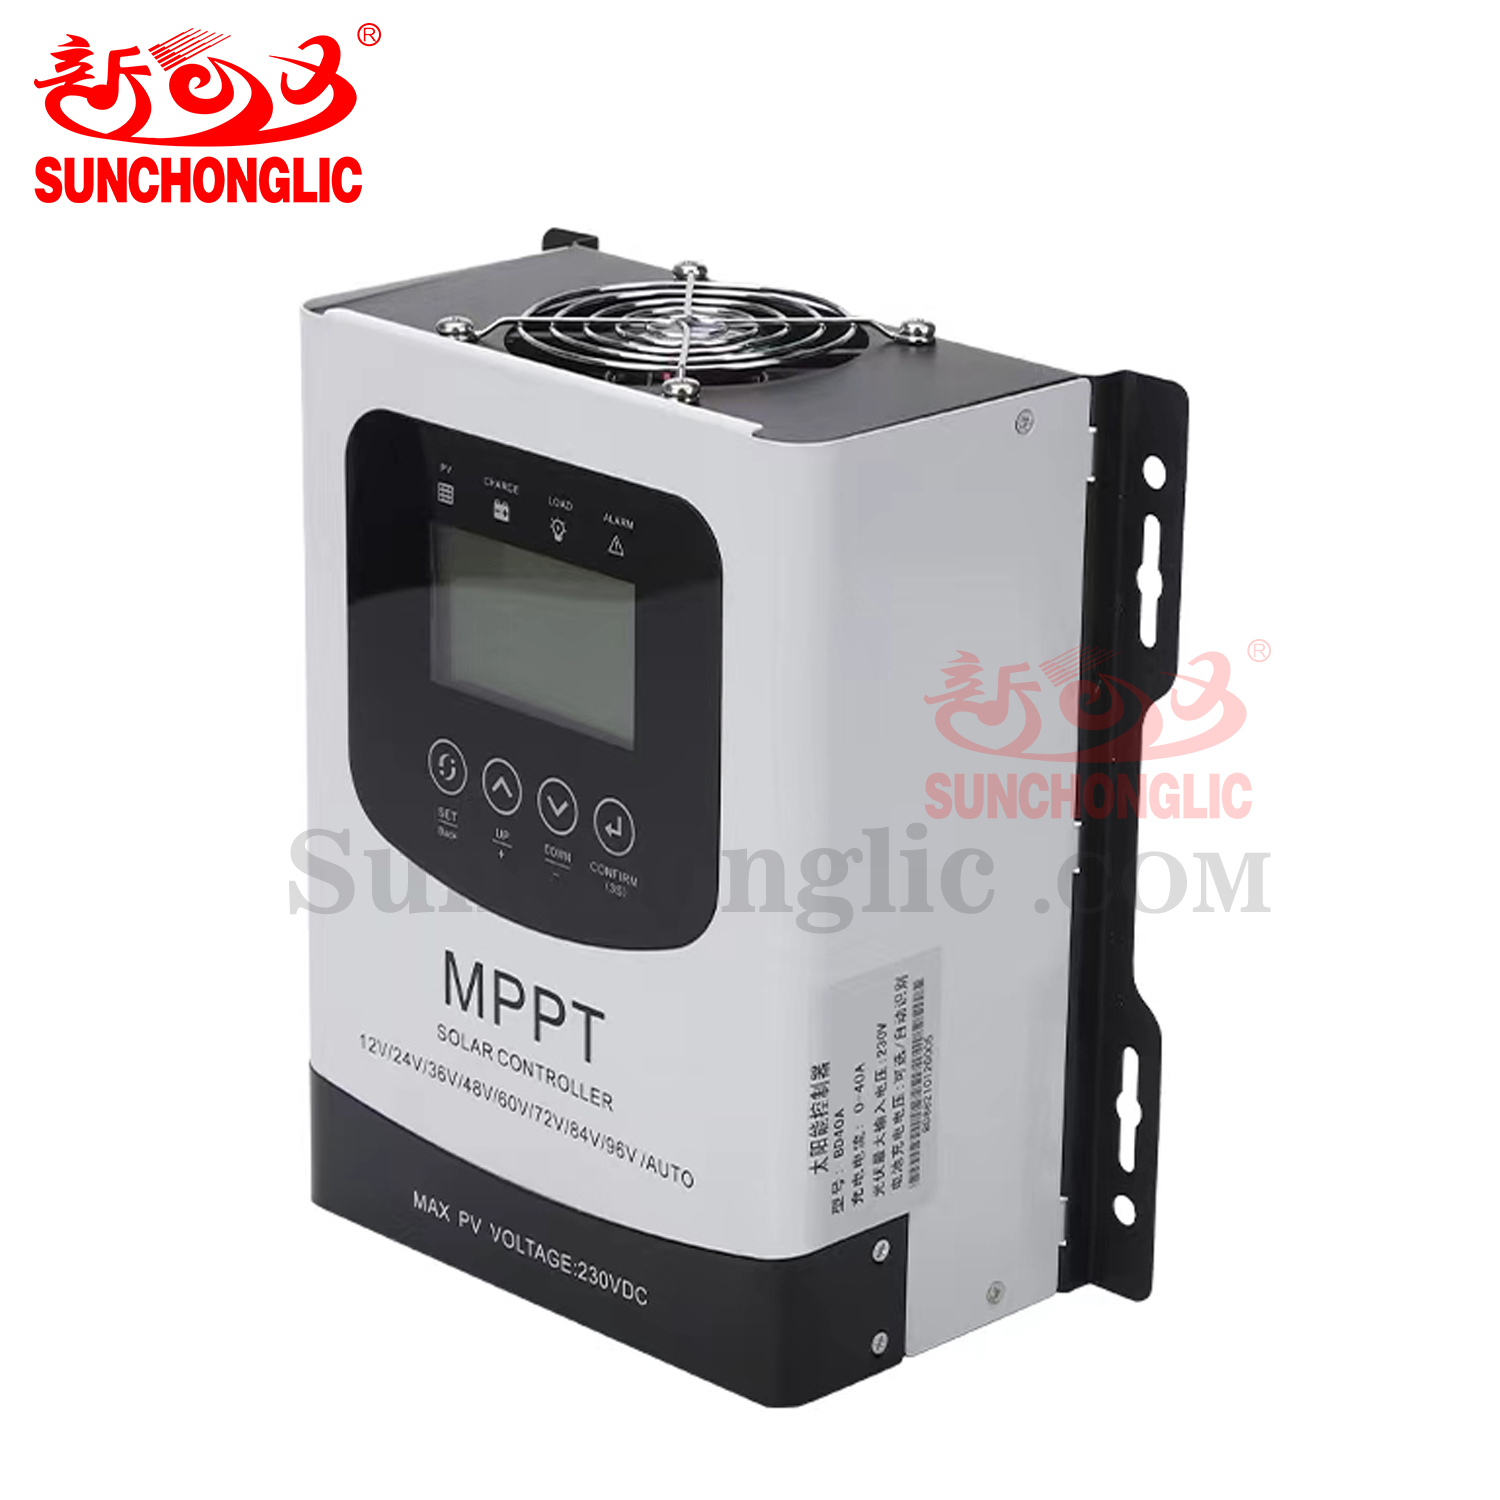 MPPT Solar Charge Controller - MPPT Series